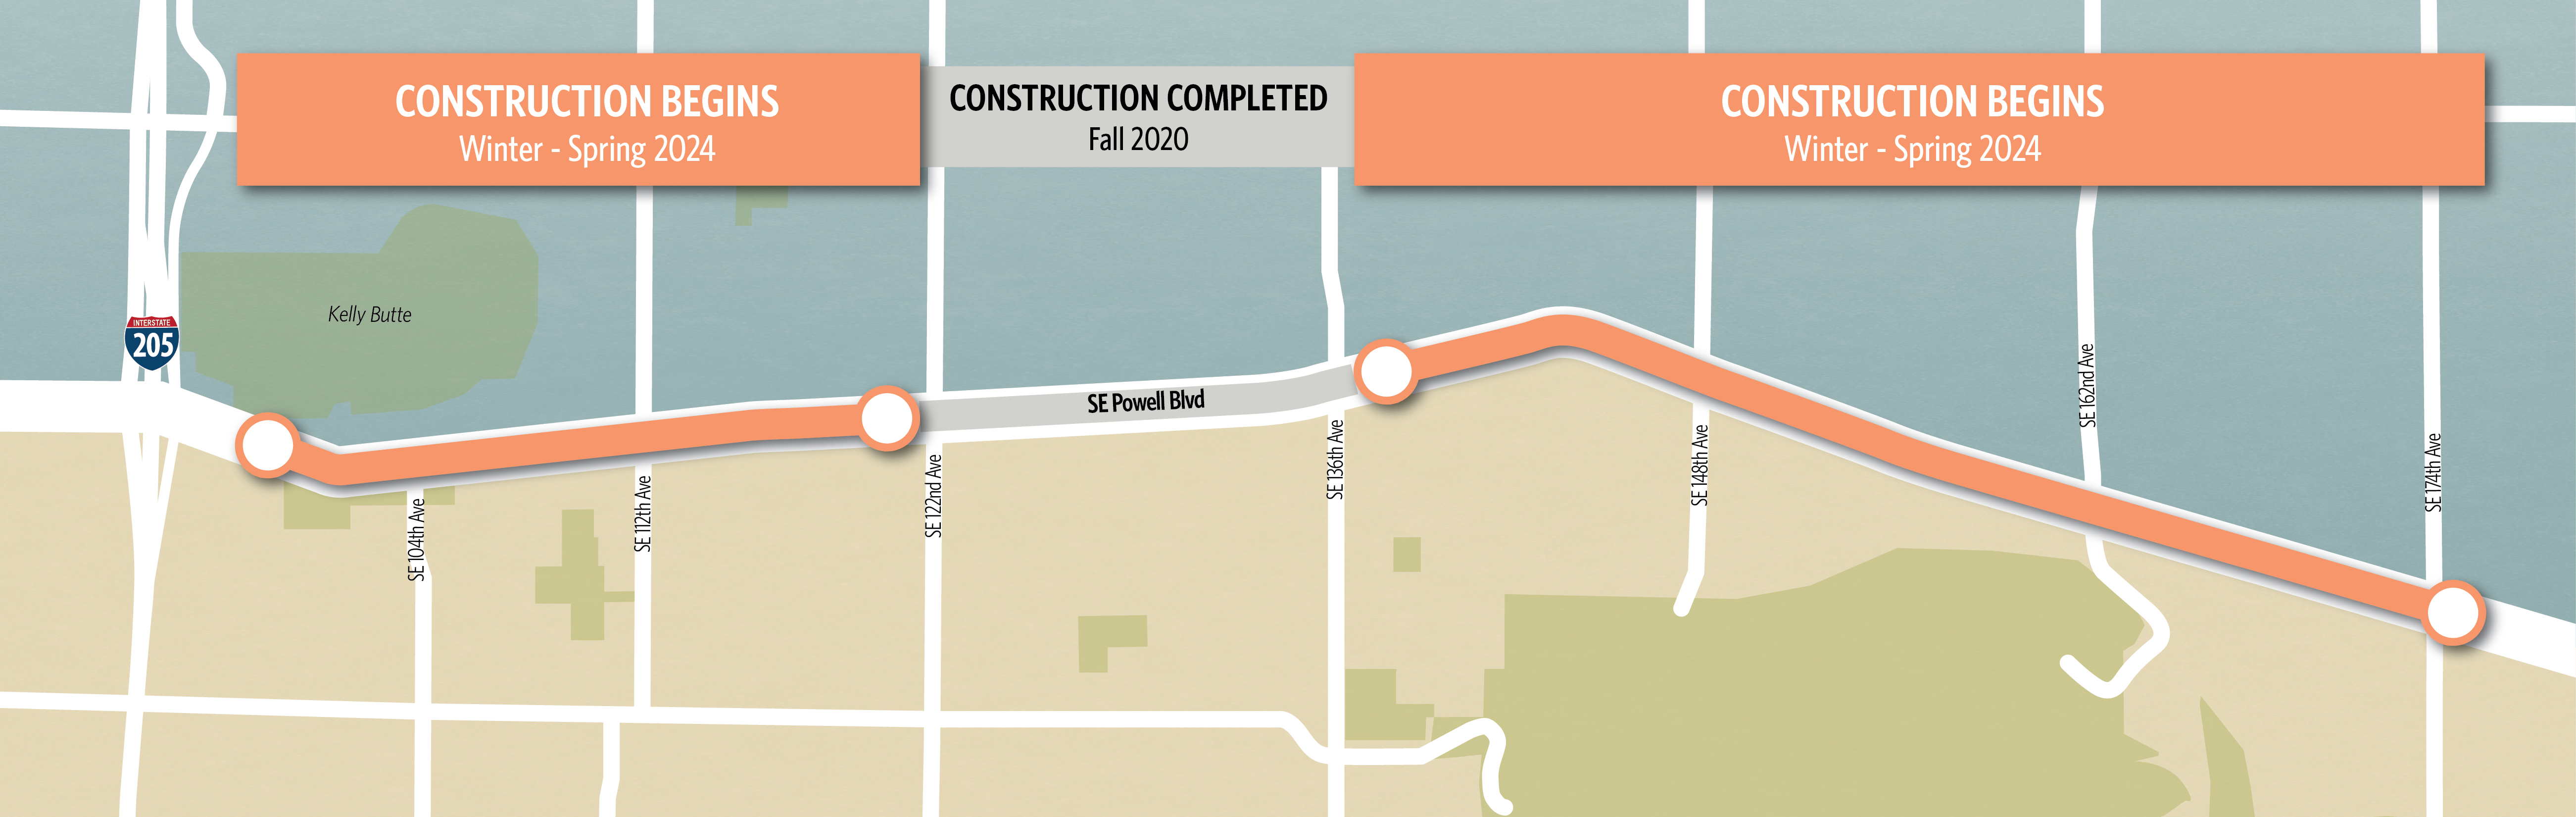 Map of the project areas on Southeast Powell Boulevard.